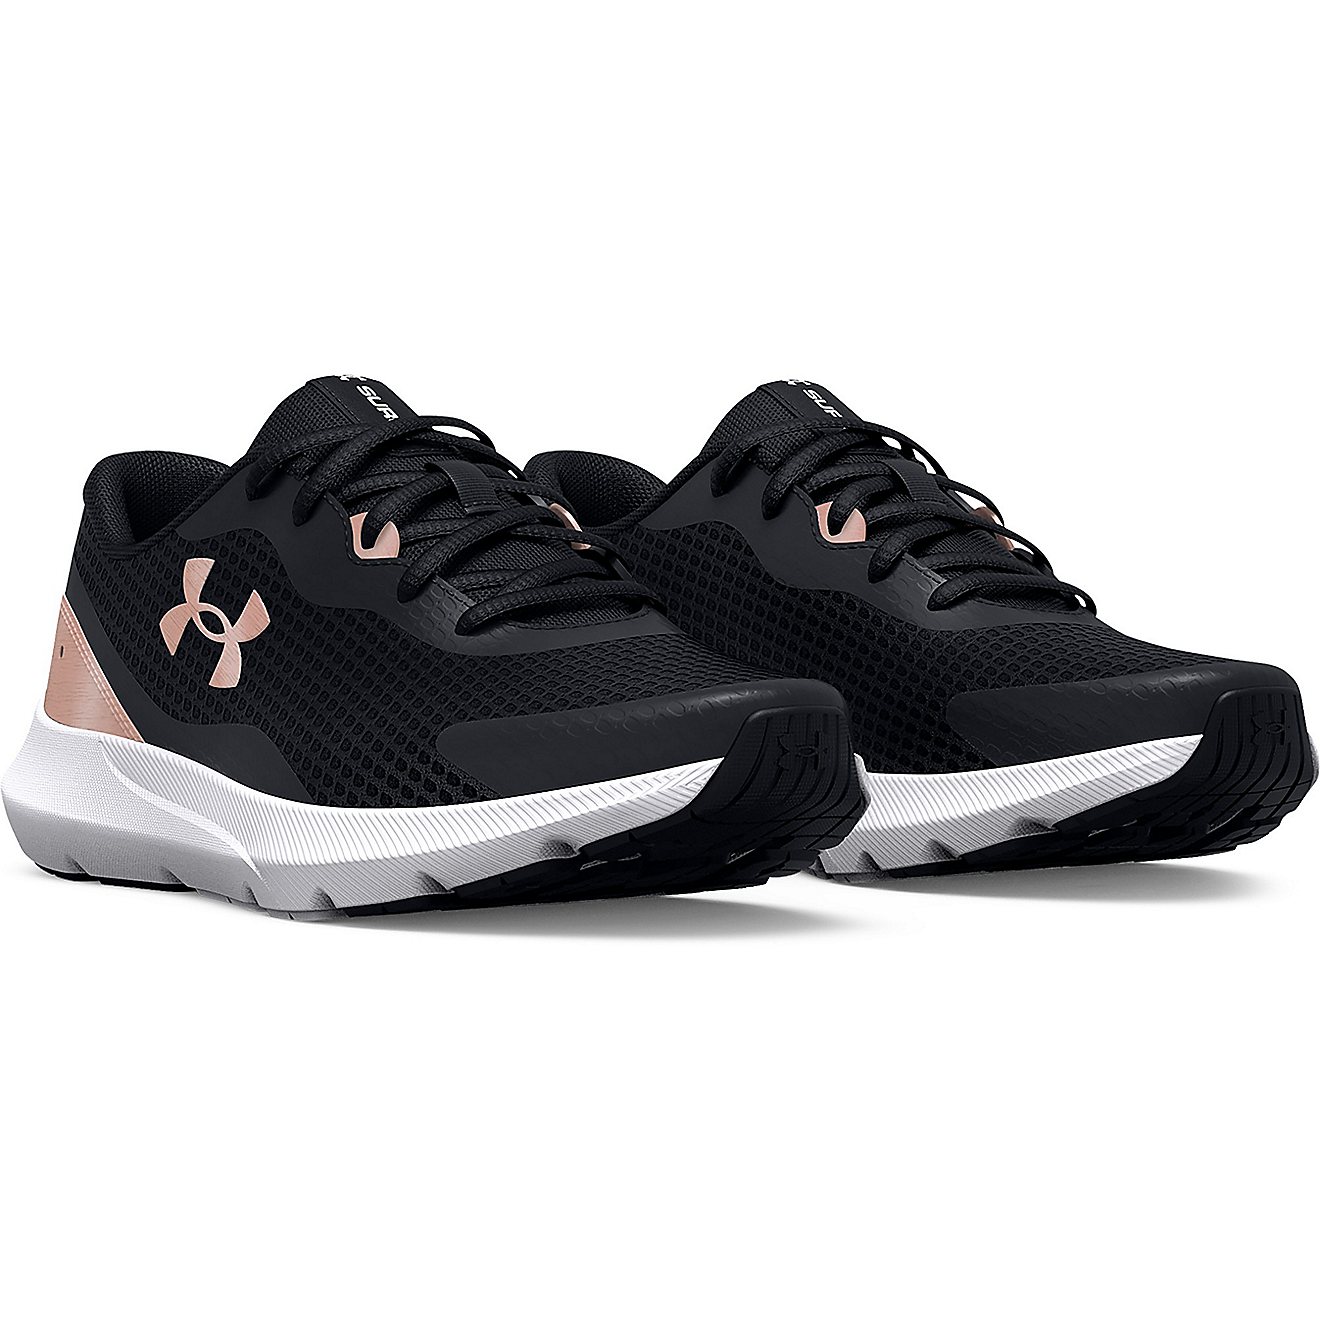 Under Armour Women’s Surge 3 Running Shoes | Academy